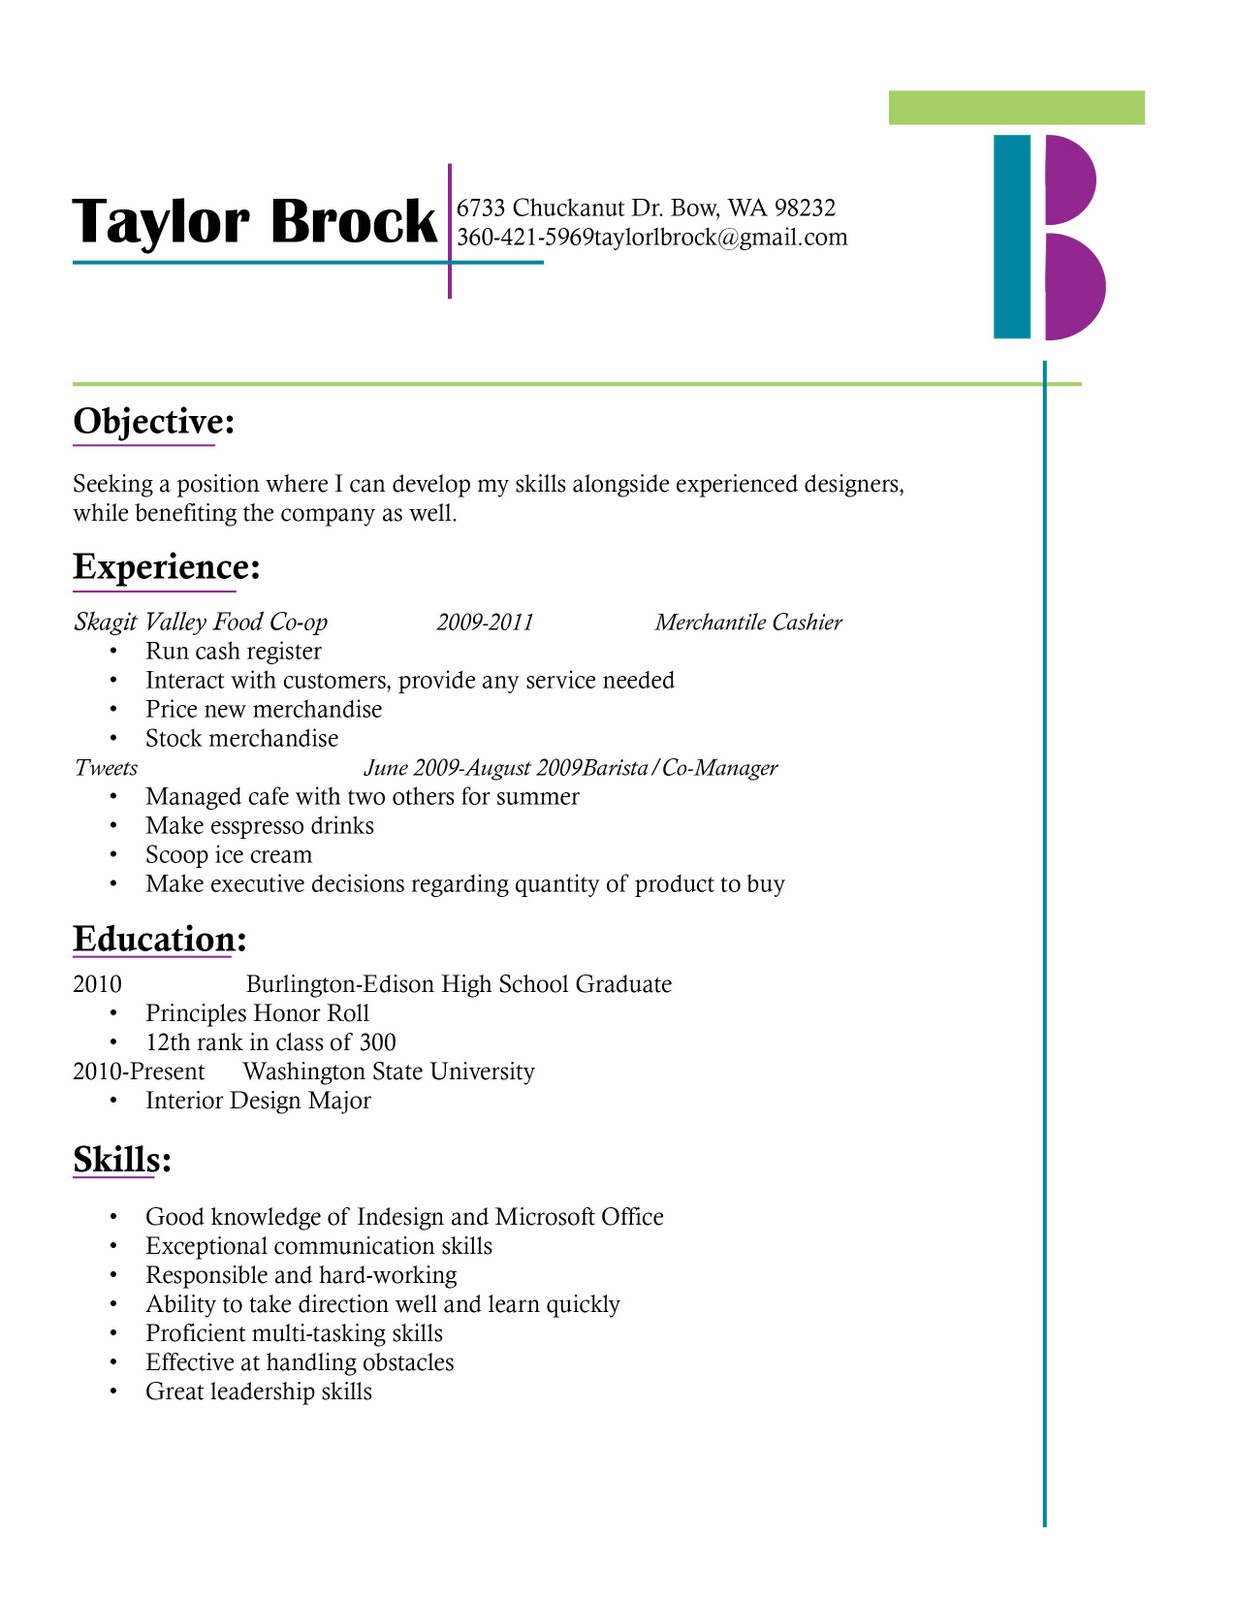 ... to design a resume using indesign i ve done a few resumes before but